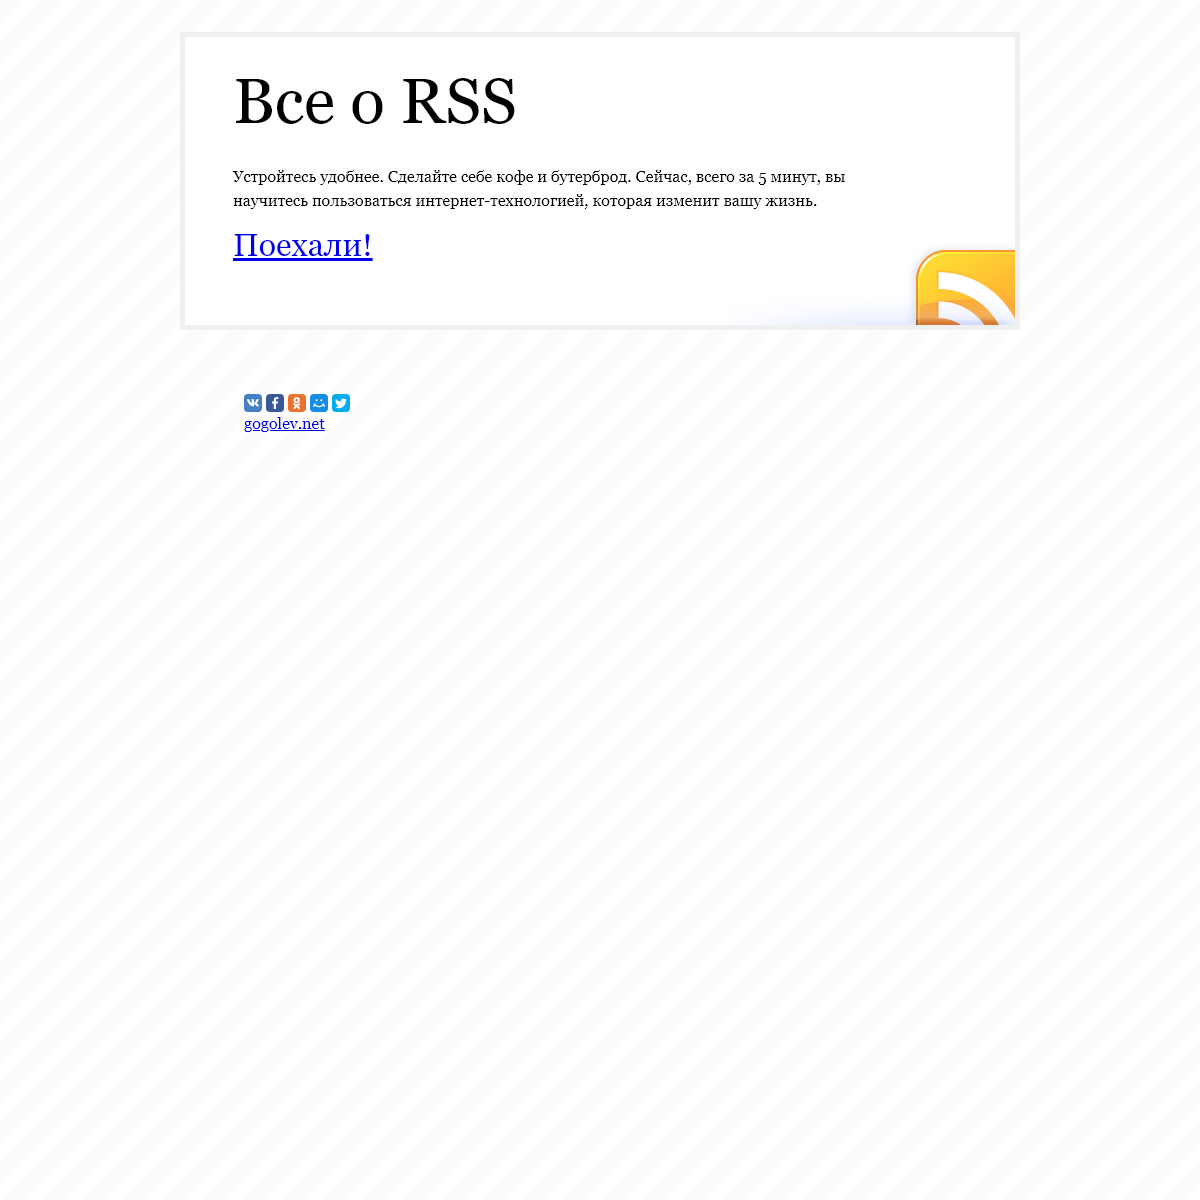 A complete backup of orss.ru